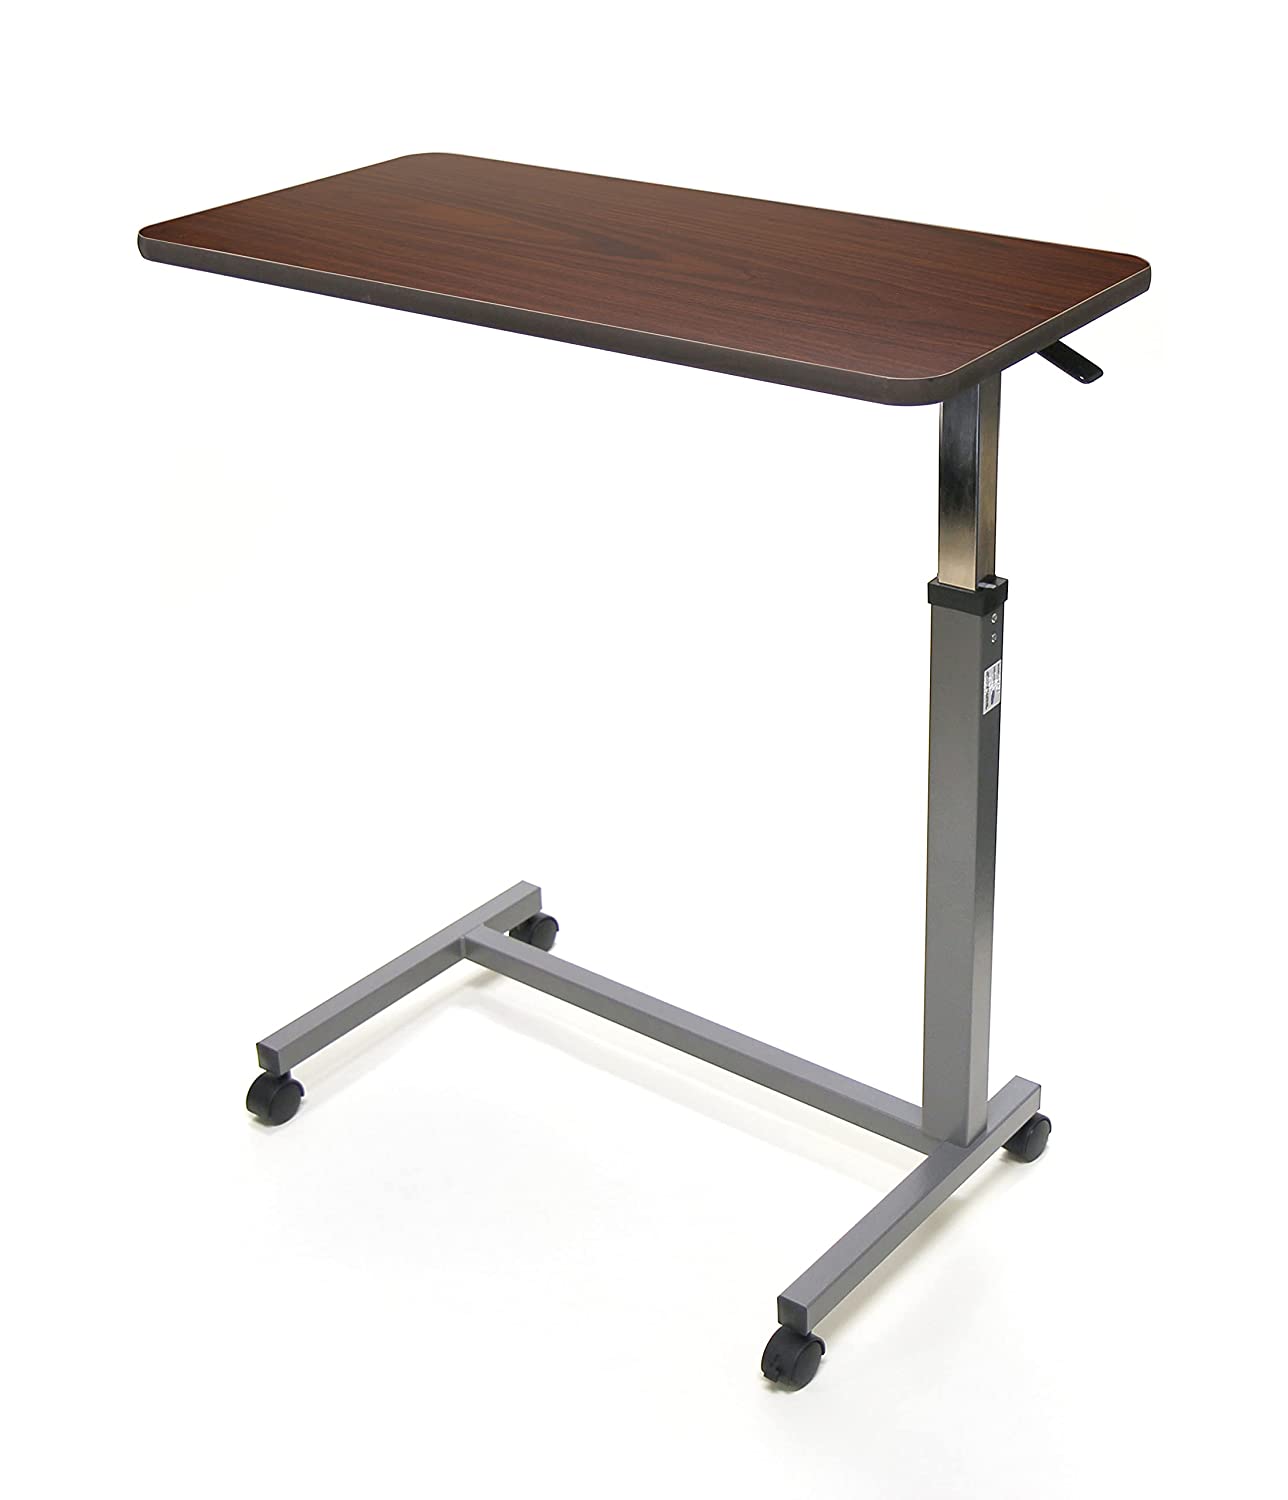 Hospital Style Overbed Table with Auto-Touch Adjustable